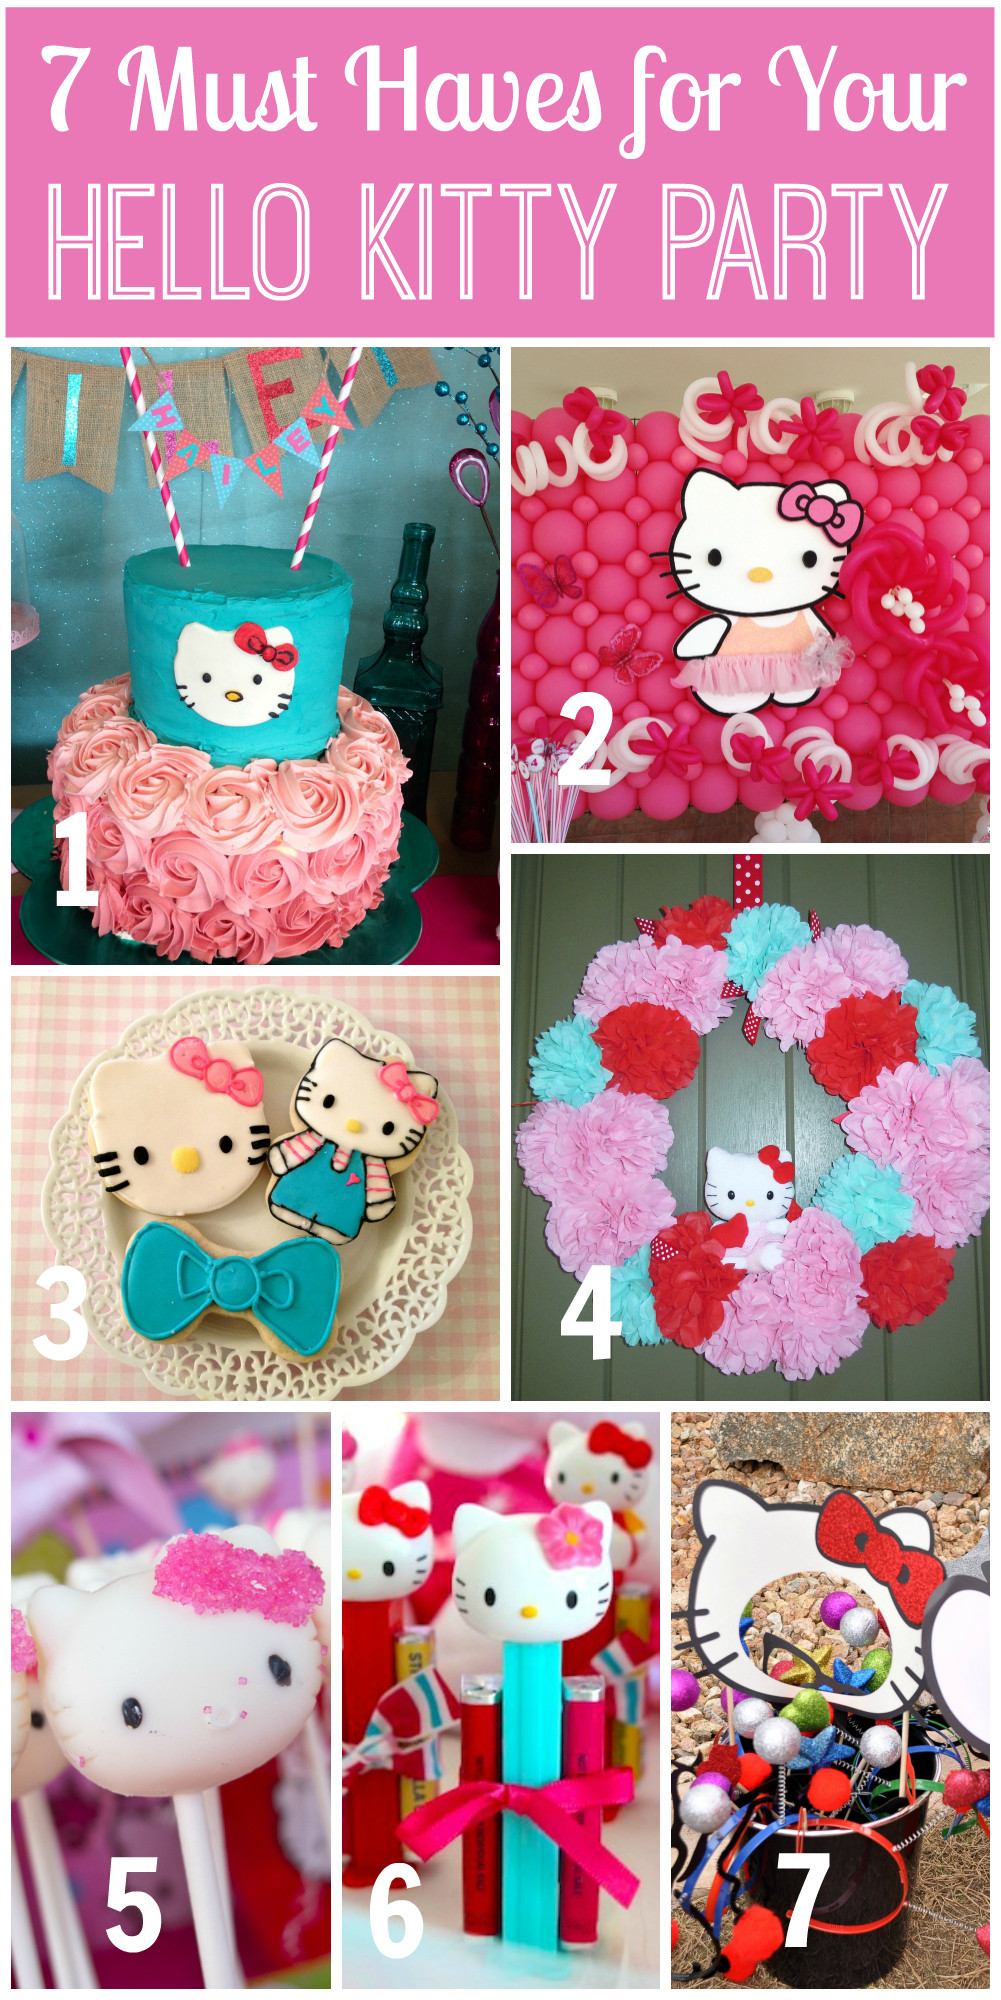 Hello Kitty Birthday Party
 7 Things You Must Have at Your Hello Kitty Party